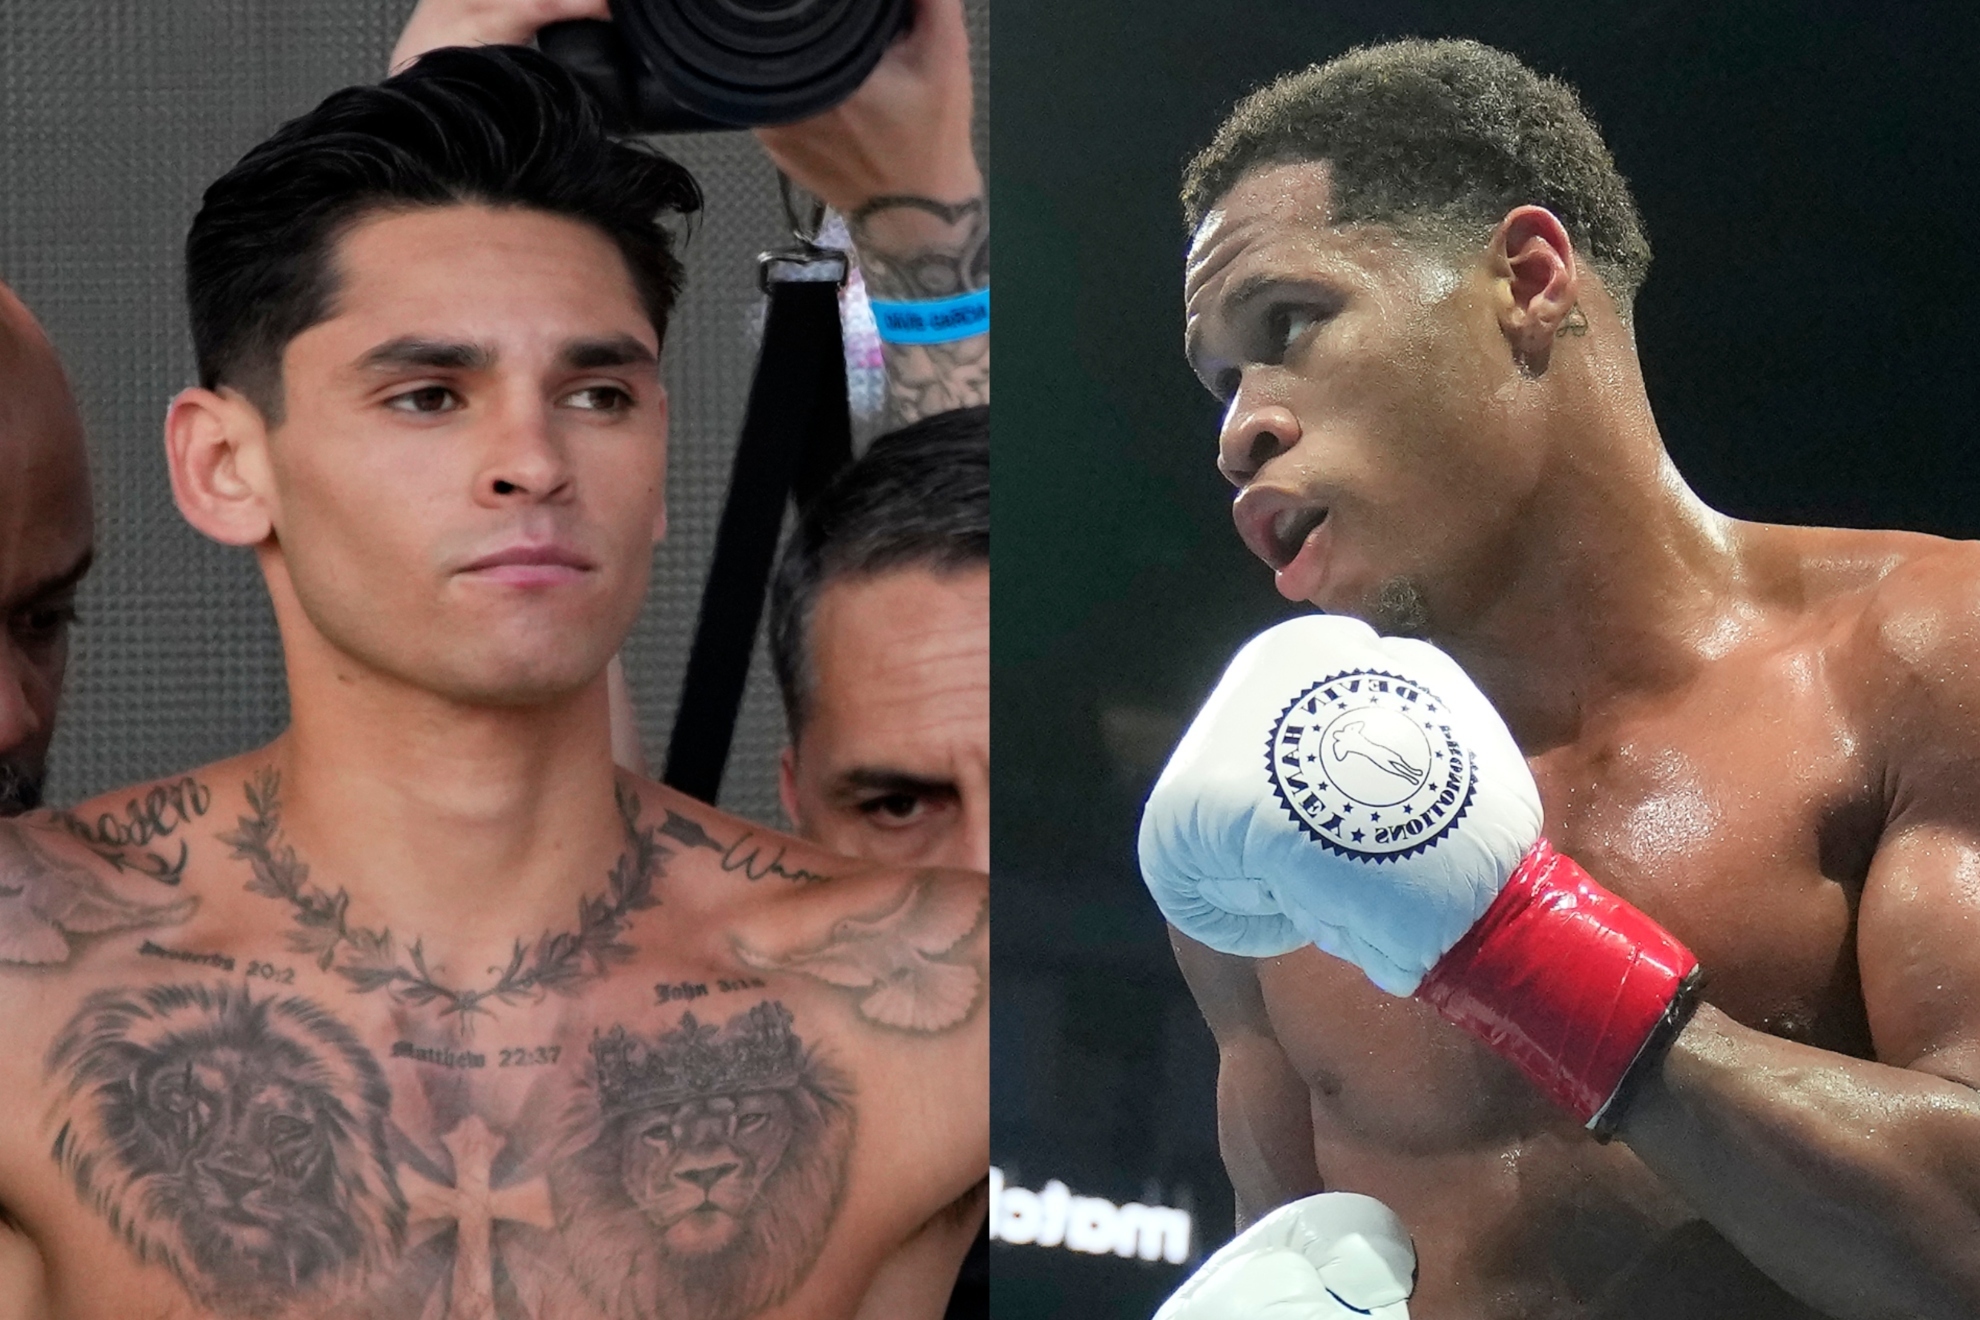 Get all the details for the upcoming Devin Haney vs Ryan Garcia fight on April 20